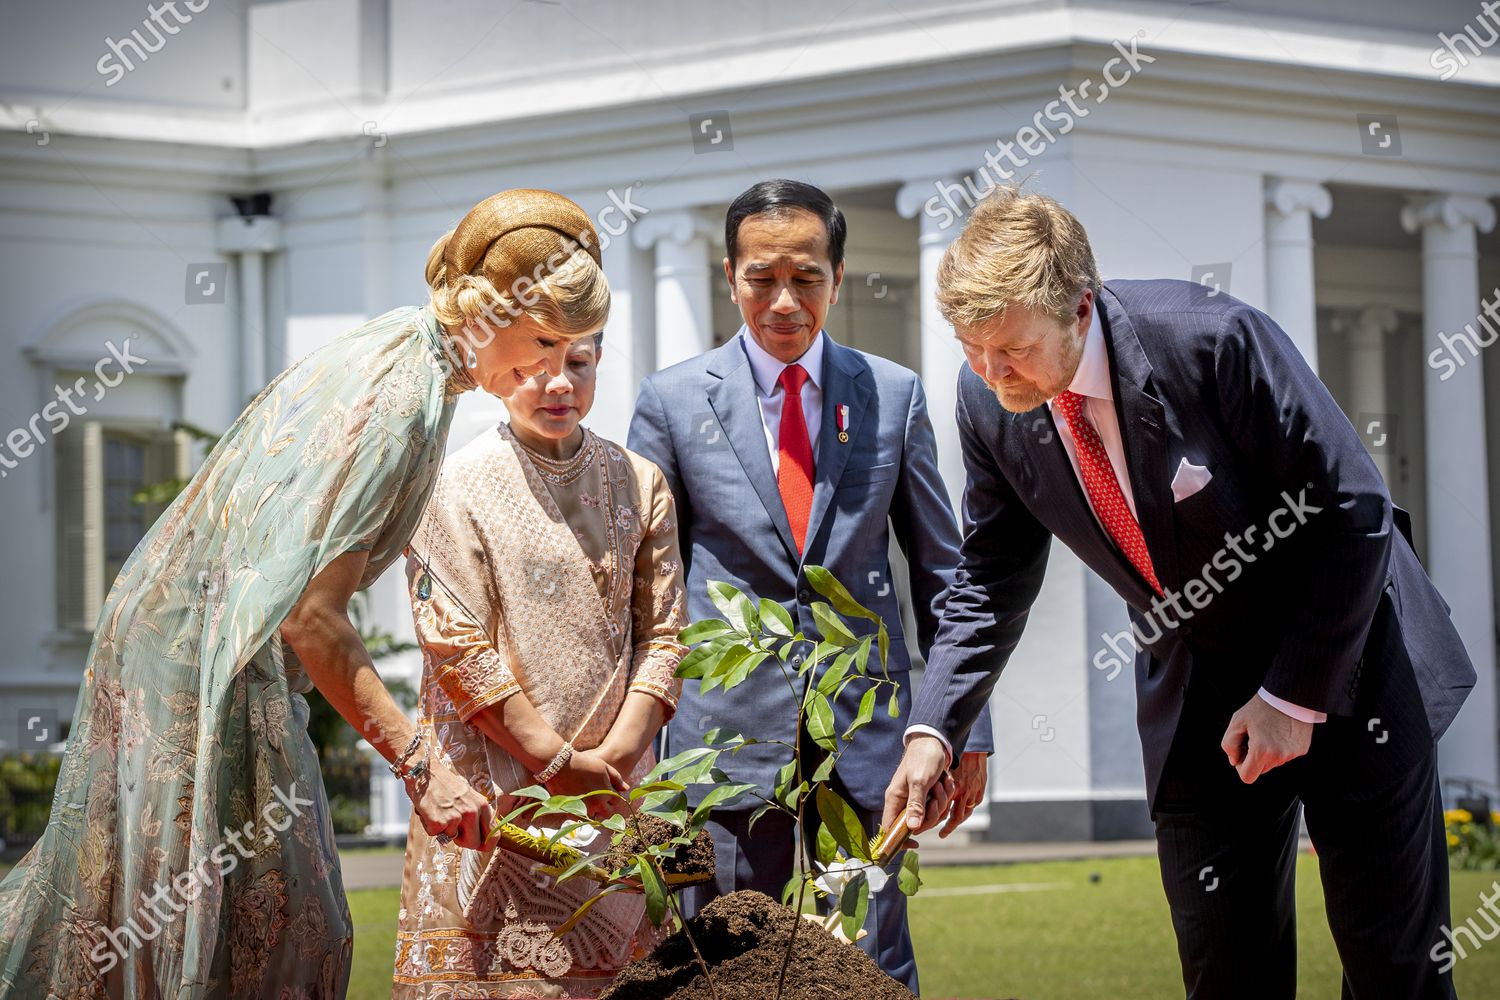 dutch-royals-visit-to-indonesia-shutterstock-editorial-10578533ae.jpg